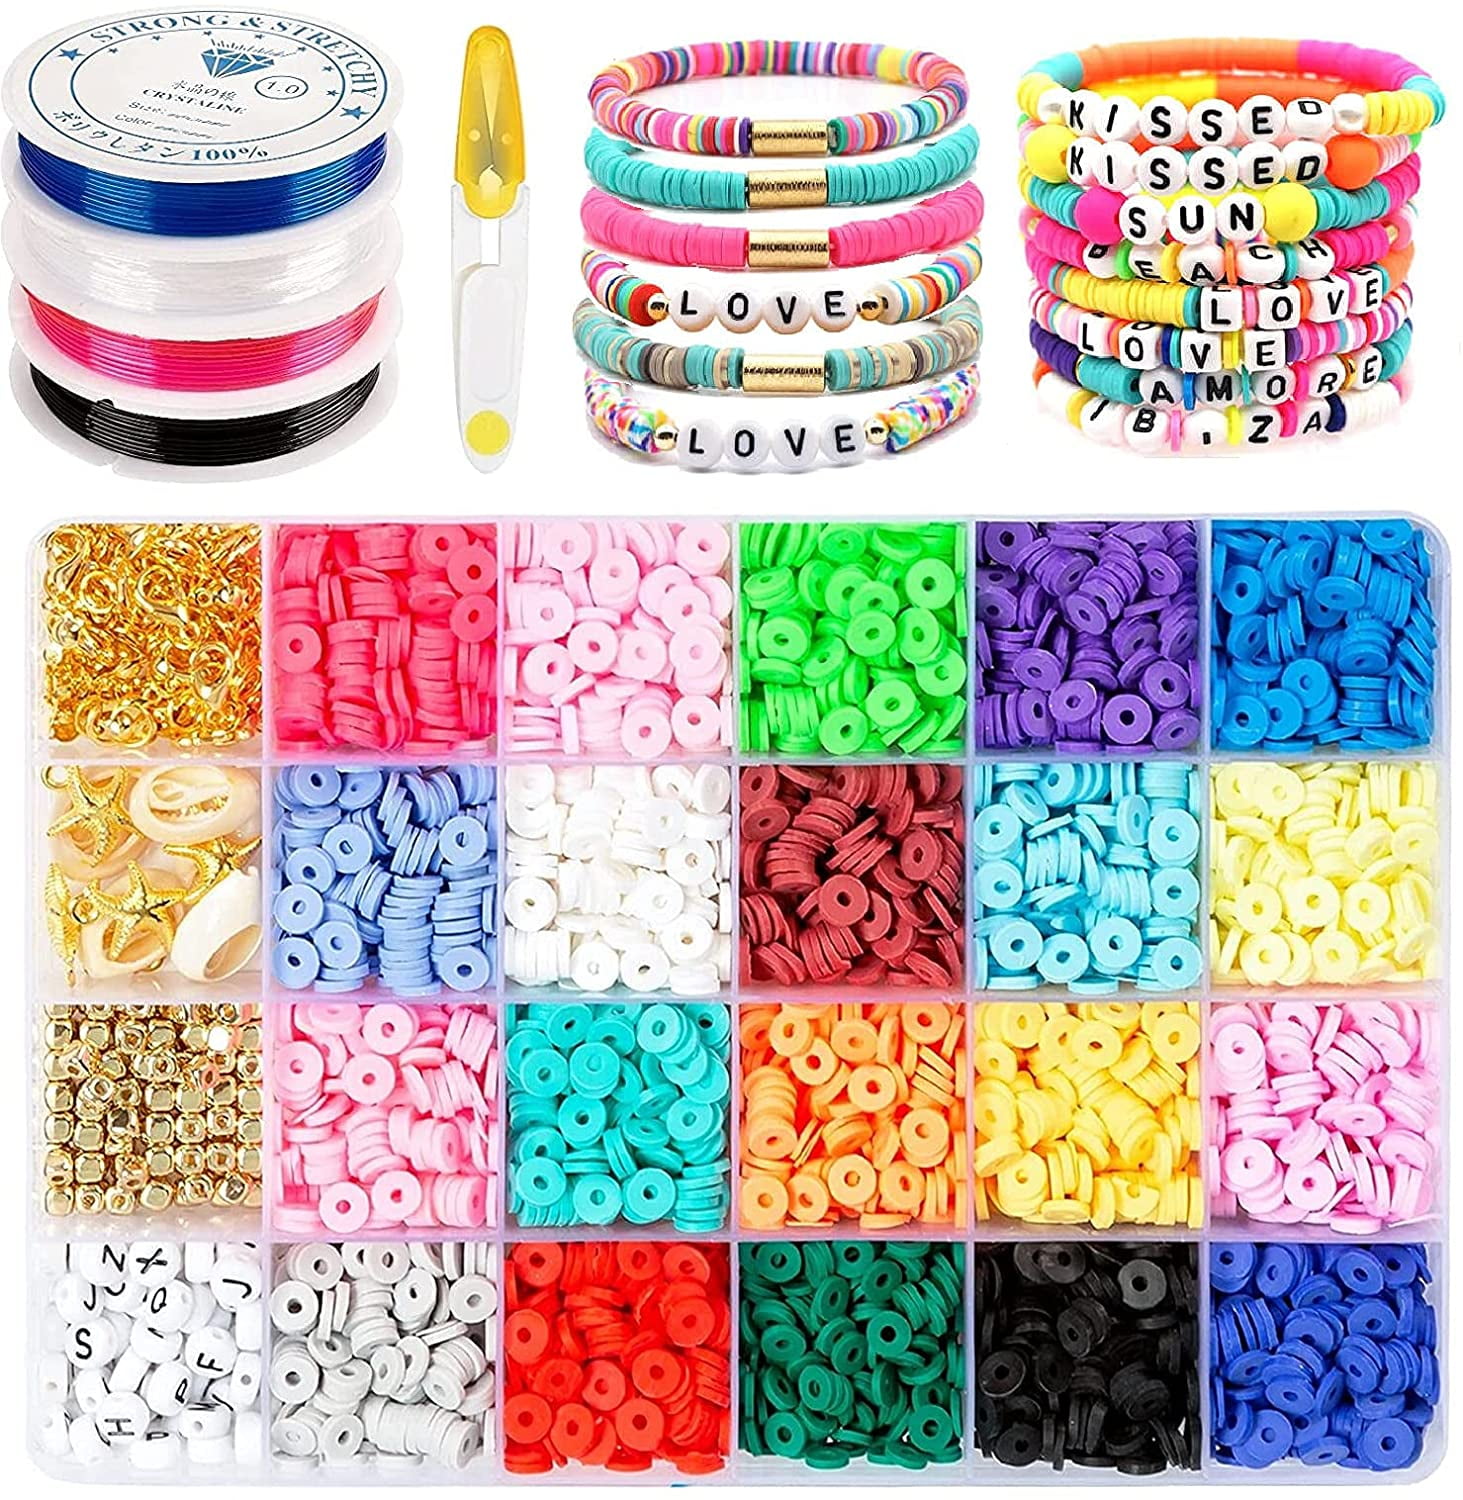 UNIZHS 6300 Pcs Clay Beads Bracelet Making kit, 24 Colors Polymer Clay  Beads kit with Pendant Charms Kit and Elastic Strings, Art Craft Gift for